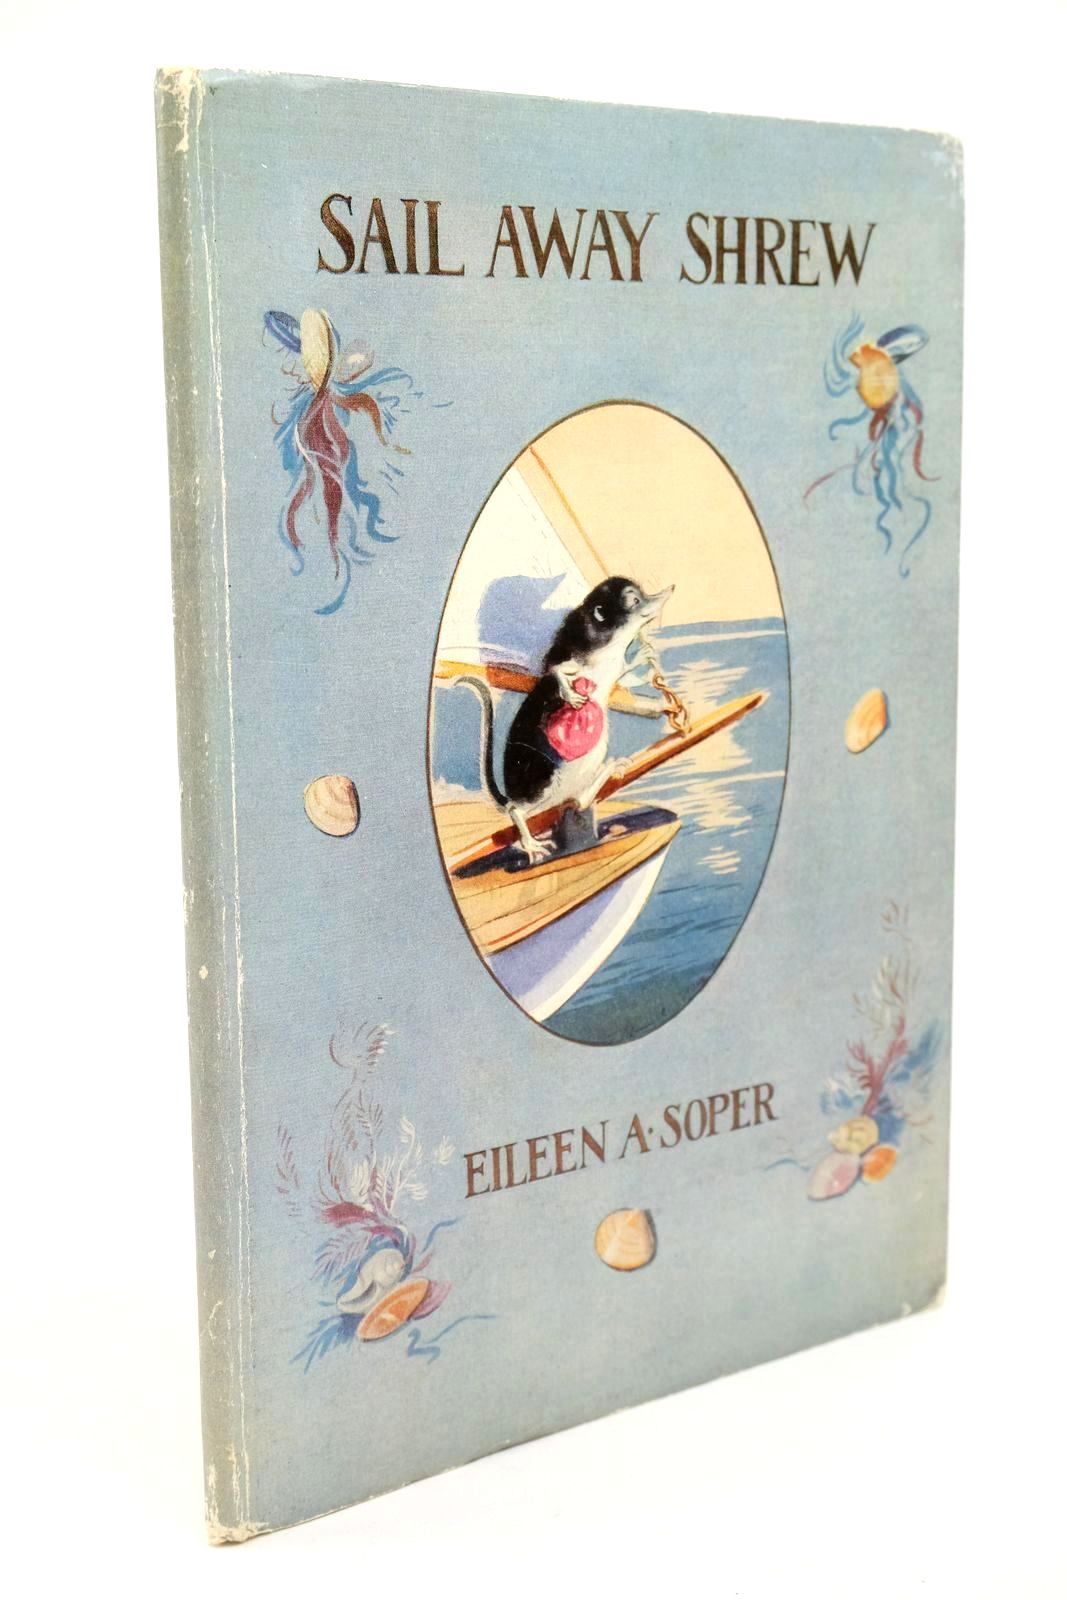 Photo of SAIL AWAY SHREW written by Soper, Eileen illustrated by Soper, Eileen published by Macmillan &amp; Co. Ltd. (STOCK CODE: 1322925)  for sale by Stella & Rose's Books